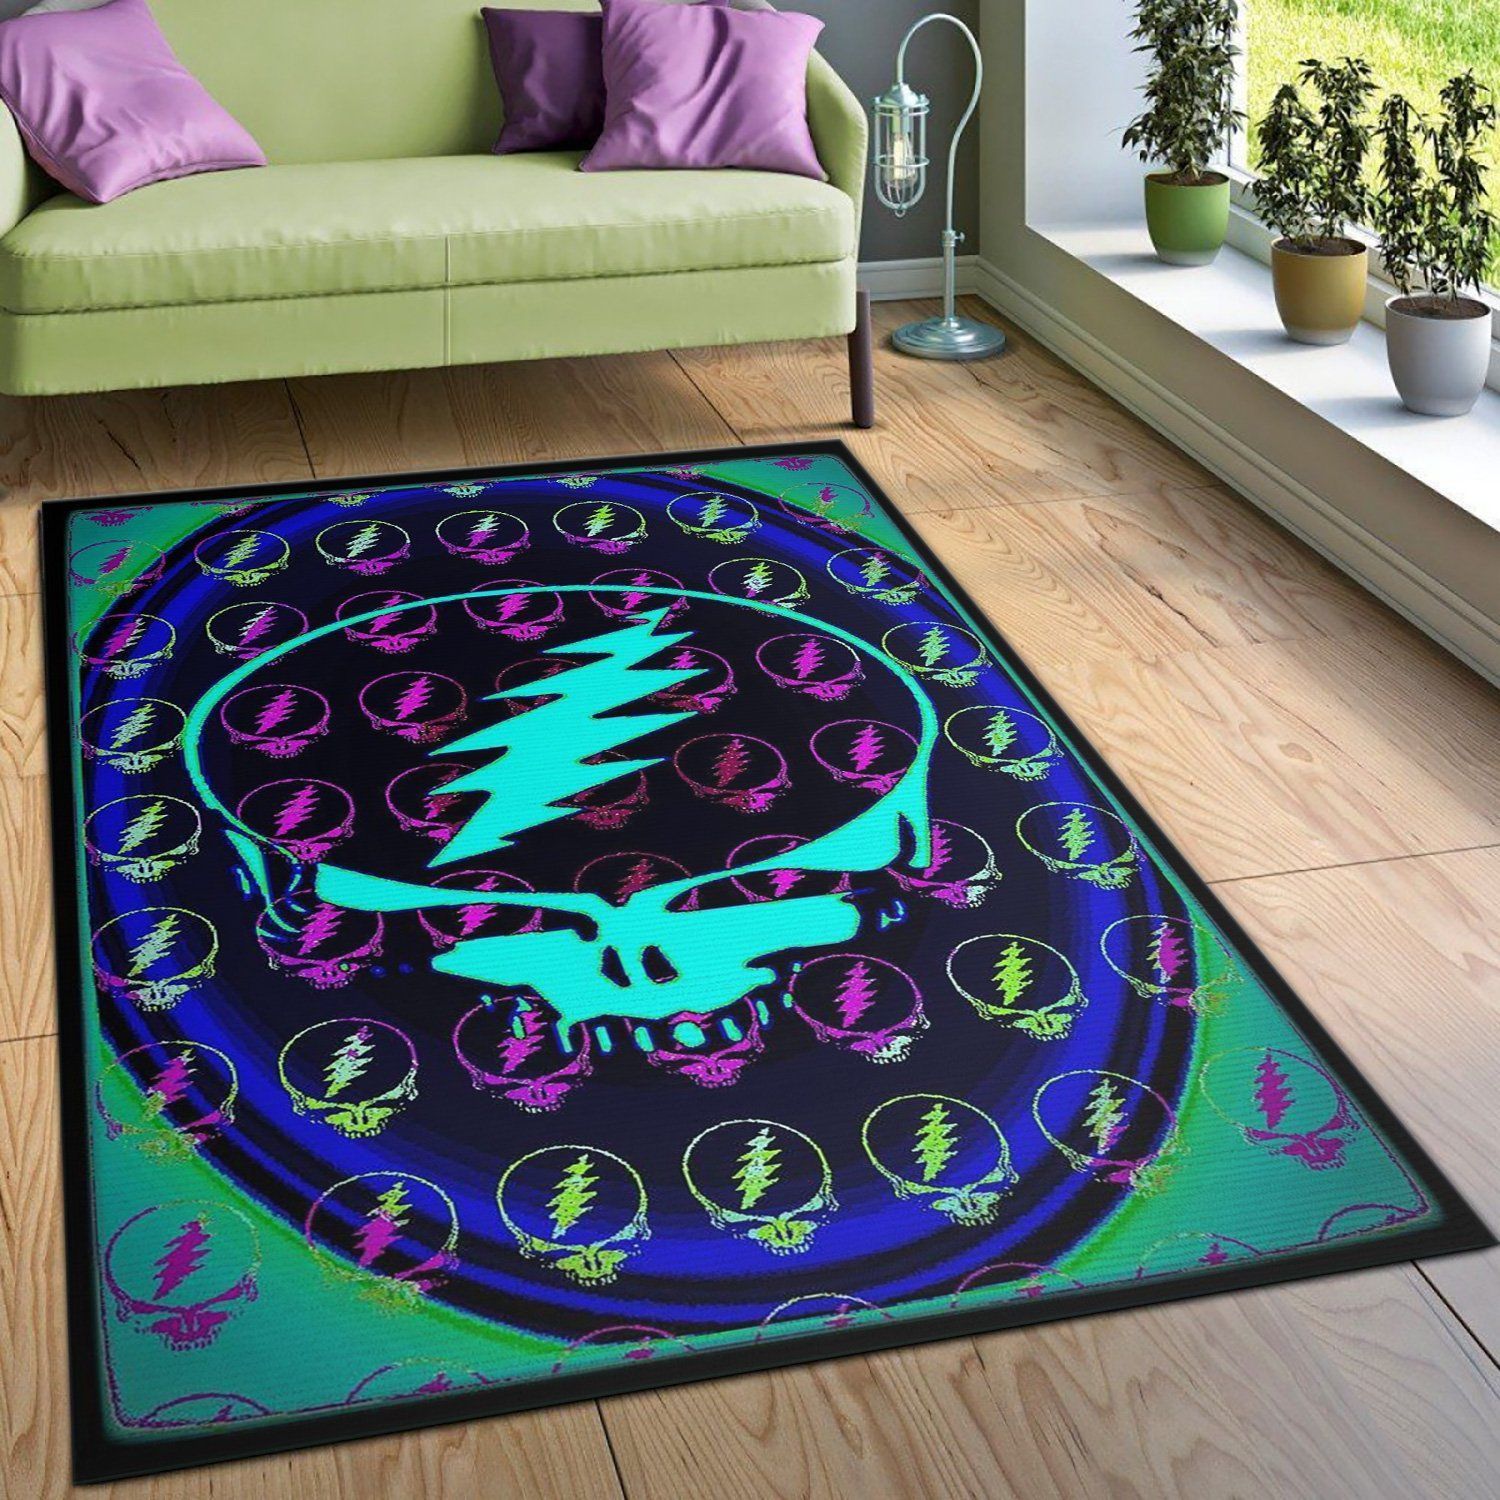 Grateful Dead Area Rug Carpet Living room and bedroom Rug Christmas Gift US Decor - Indoor Outdoor Rugs